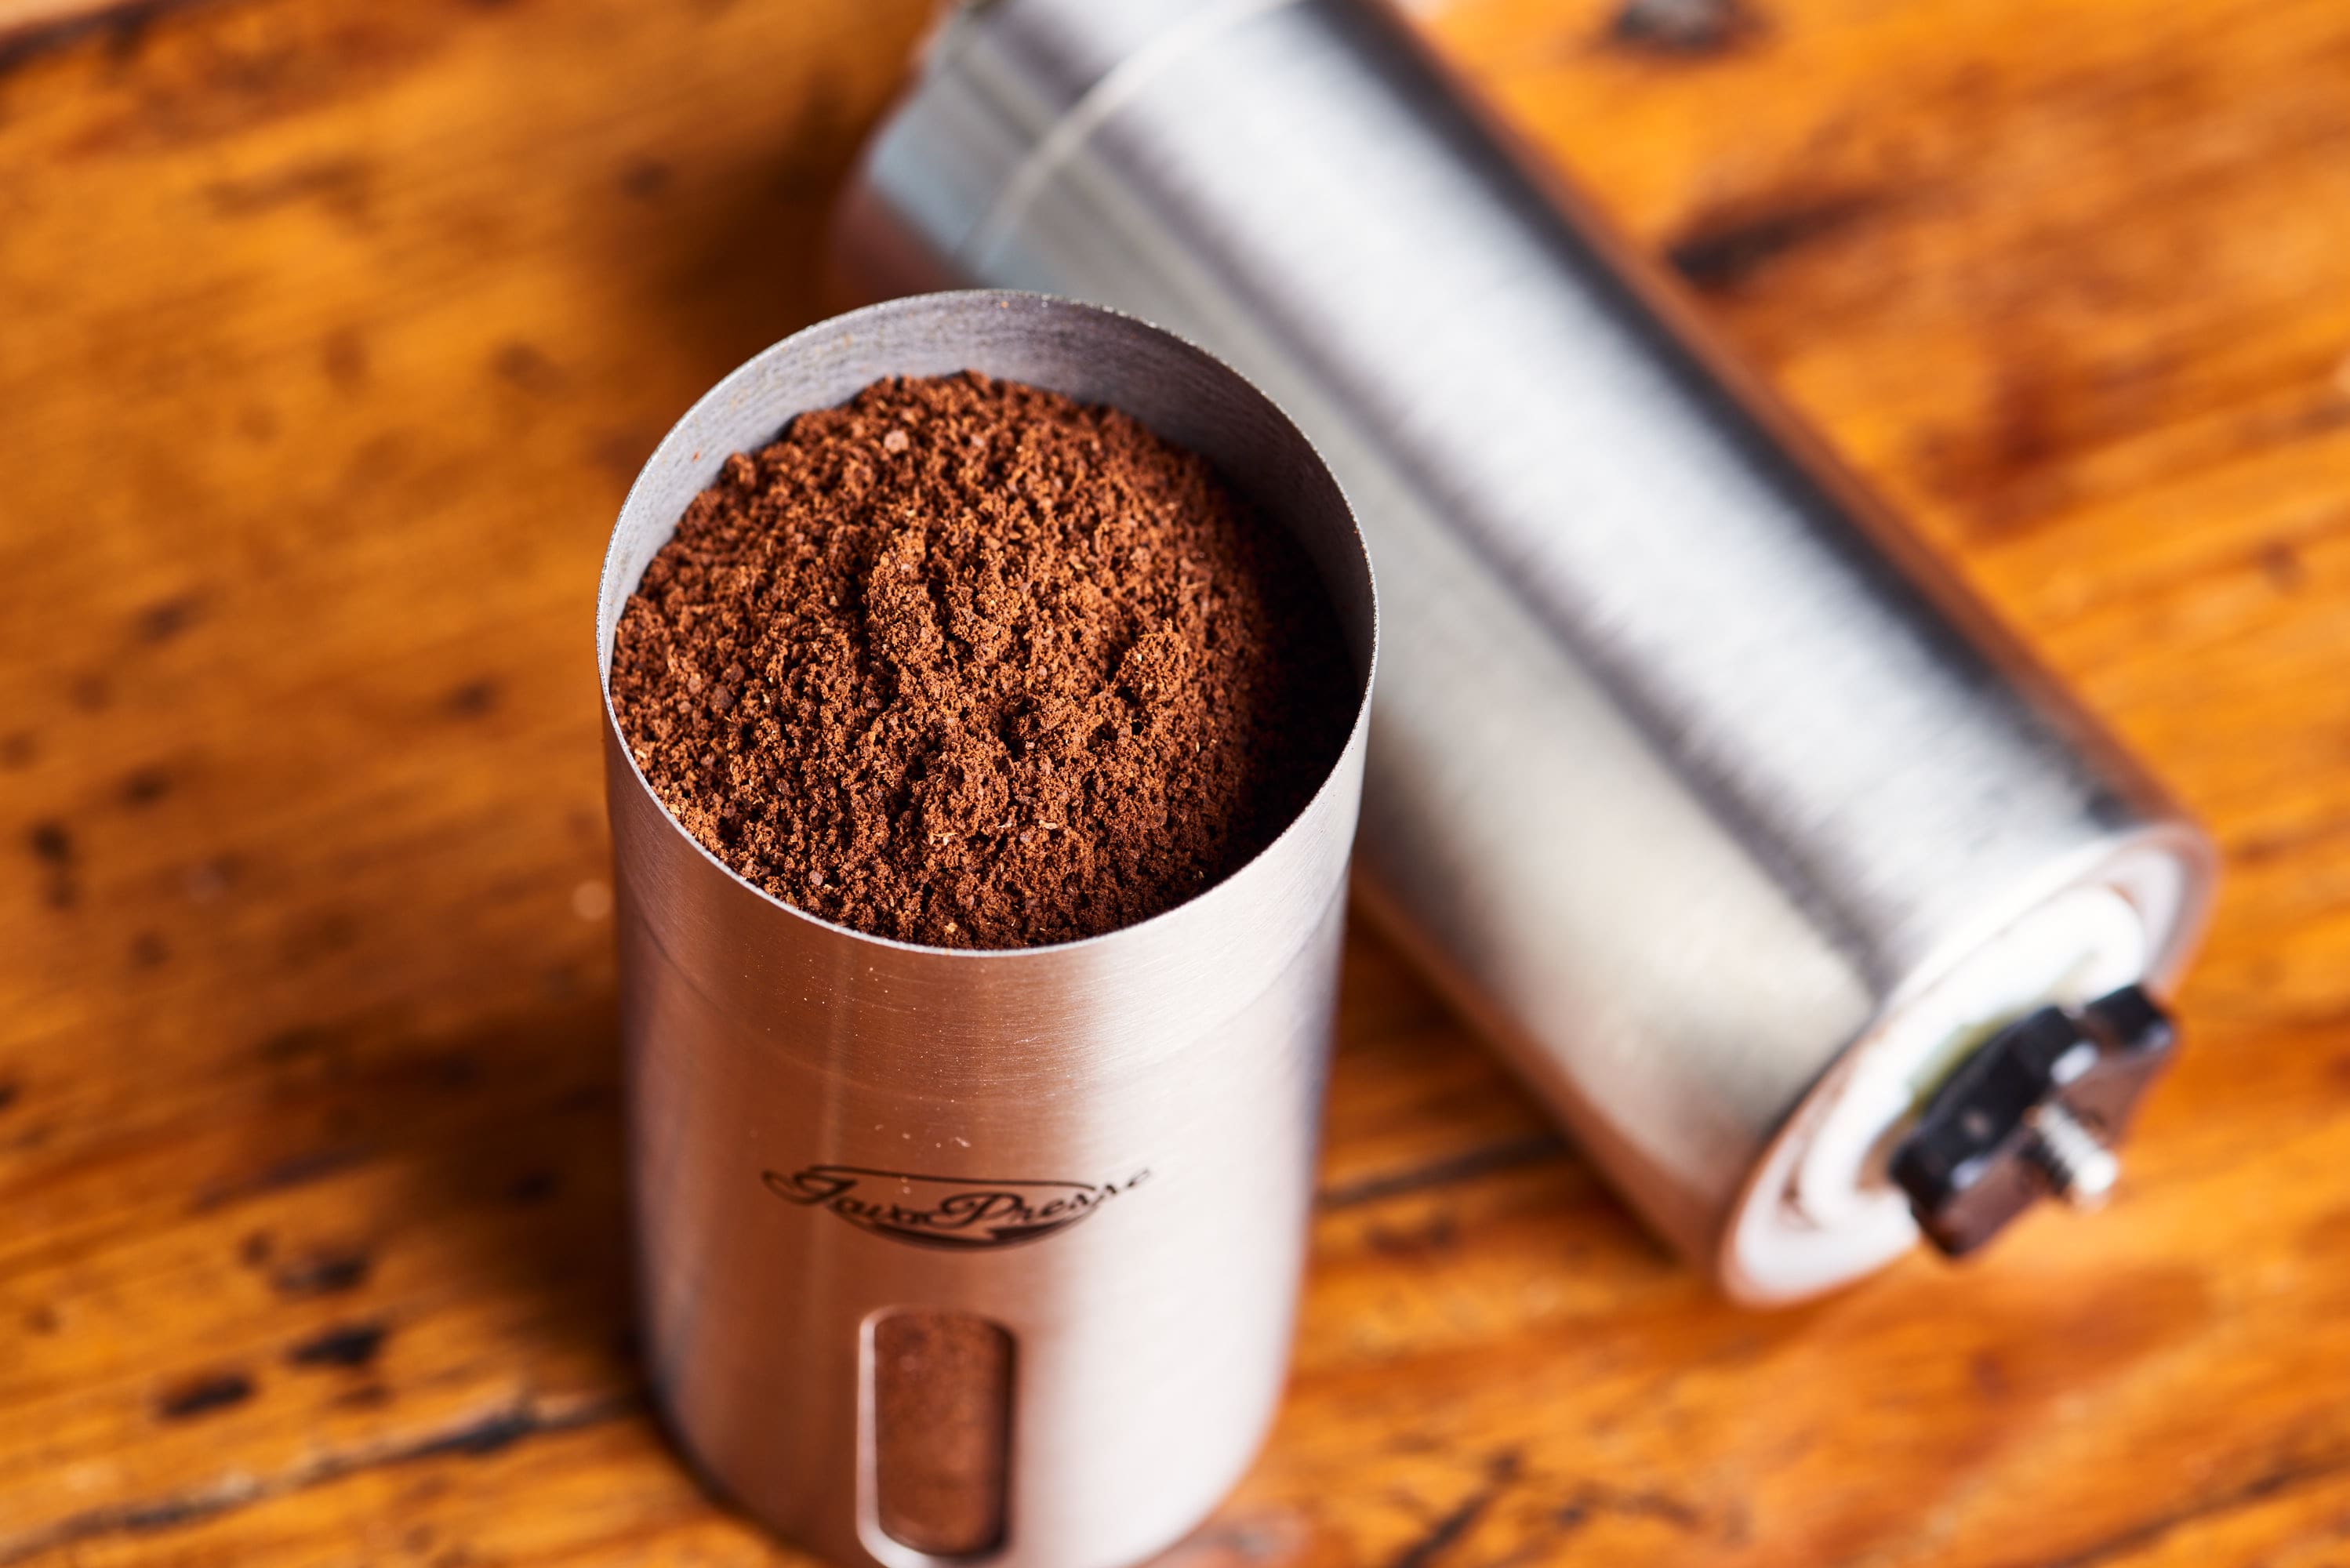 What's the Best Way to Grind Coffee at Home?